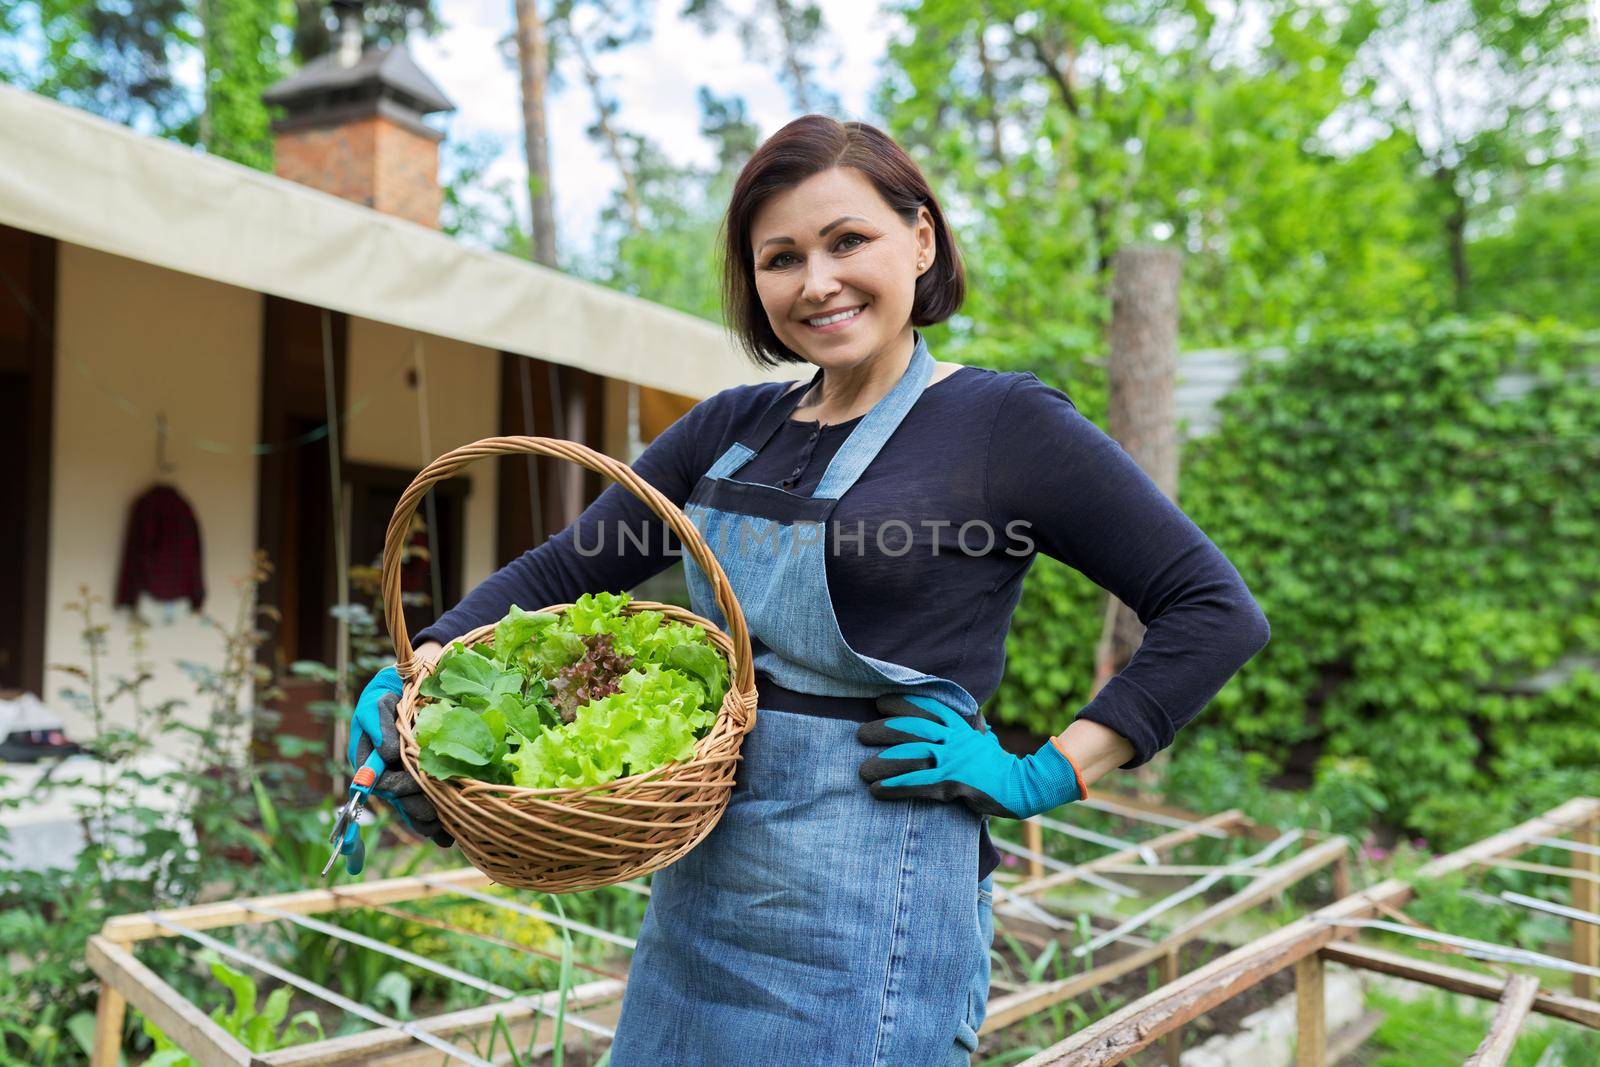 Smiling woman holding basket with freshly harvested lettuce leaves and arugula. Growing natural organic healthy food, herbs, vitamins. Garden, hobbies, leisure, gardening